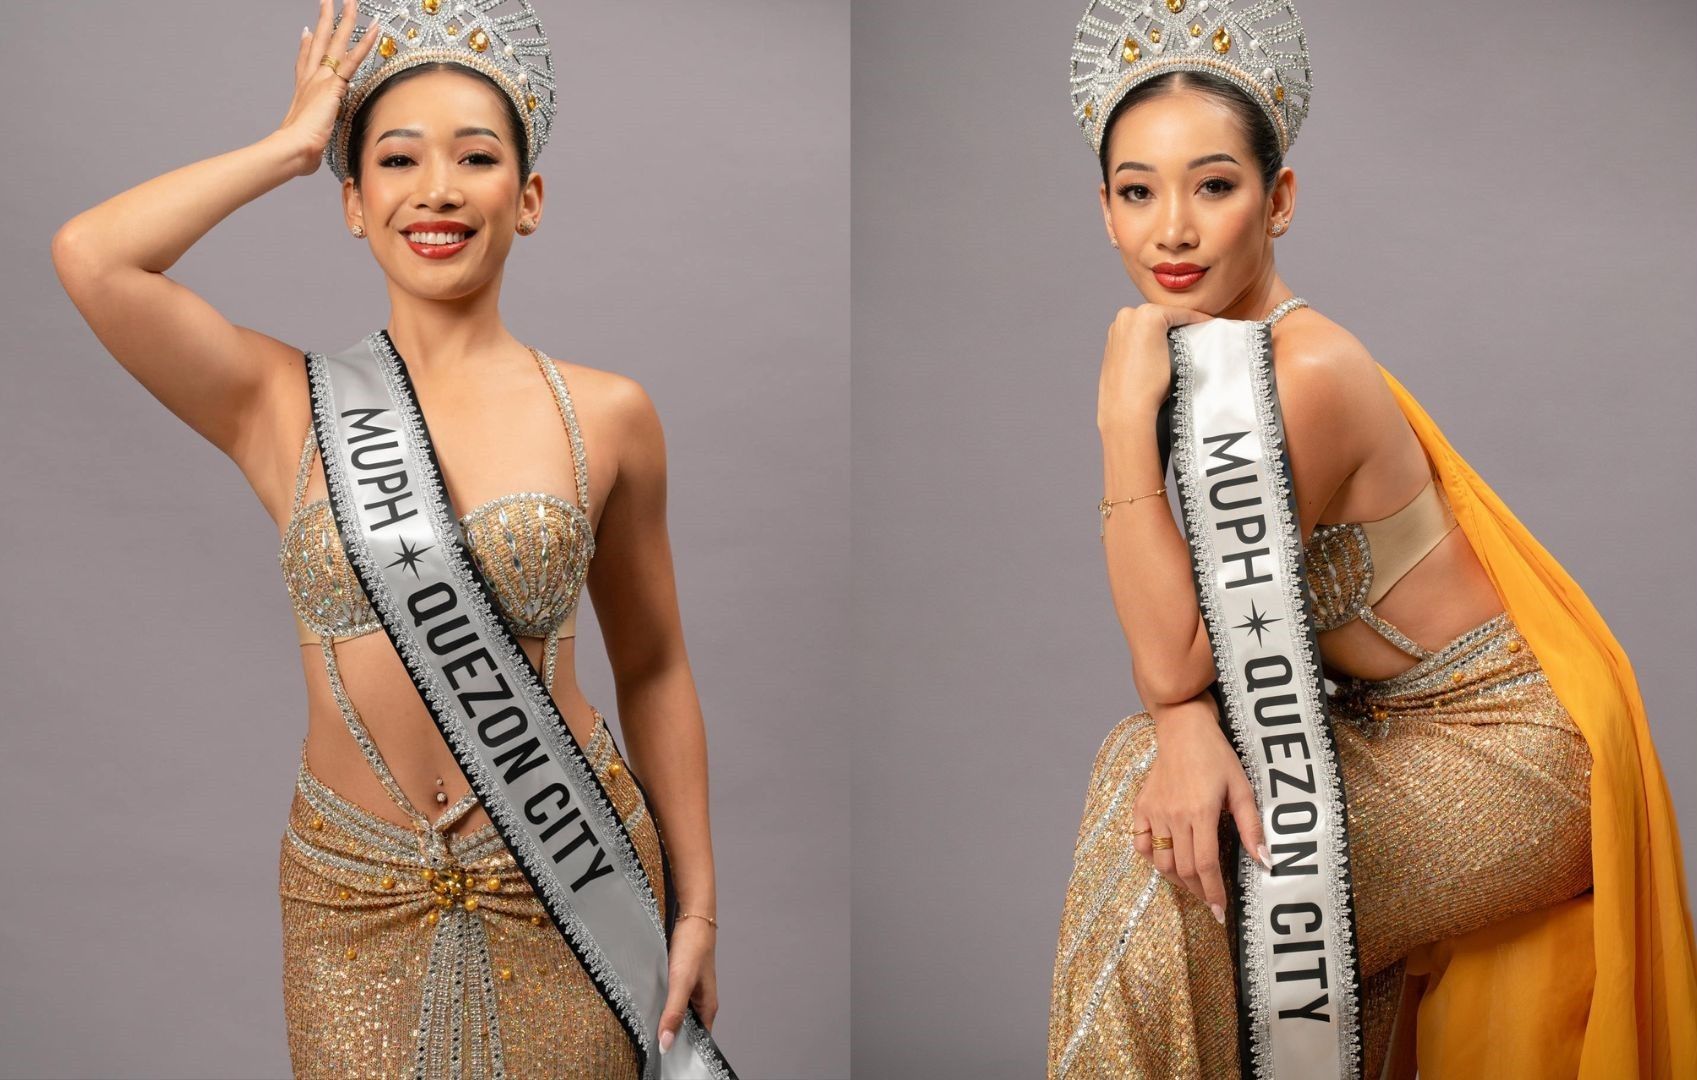 Ex-cheerleader Cam Lagmay takes over as Miss Universe Philippines - Quezon City